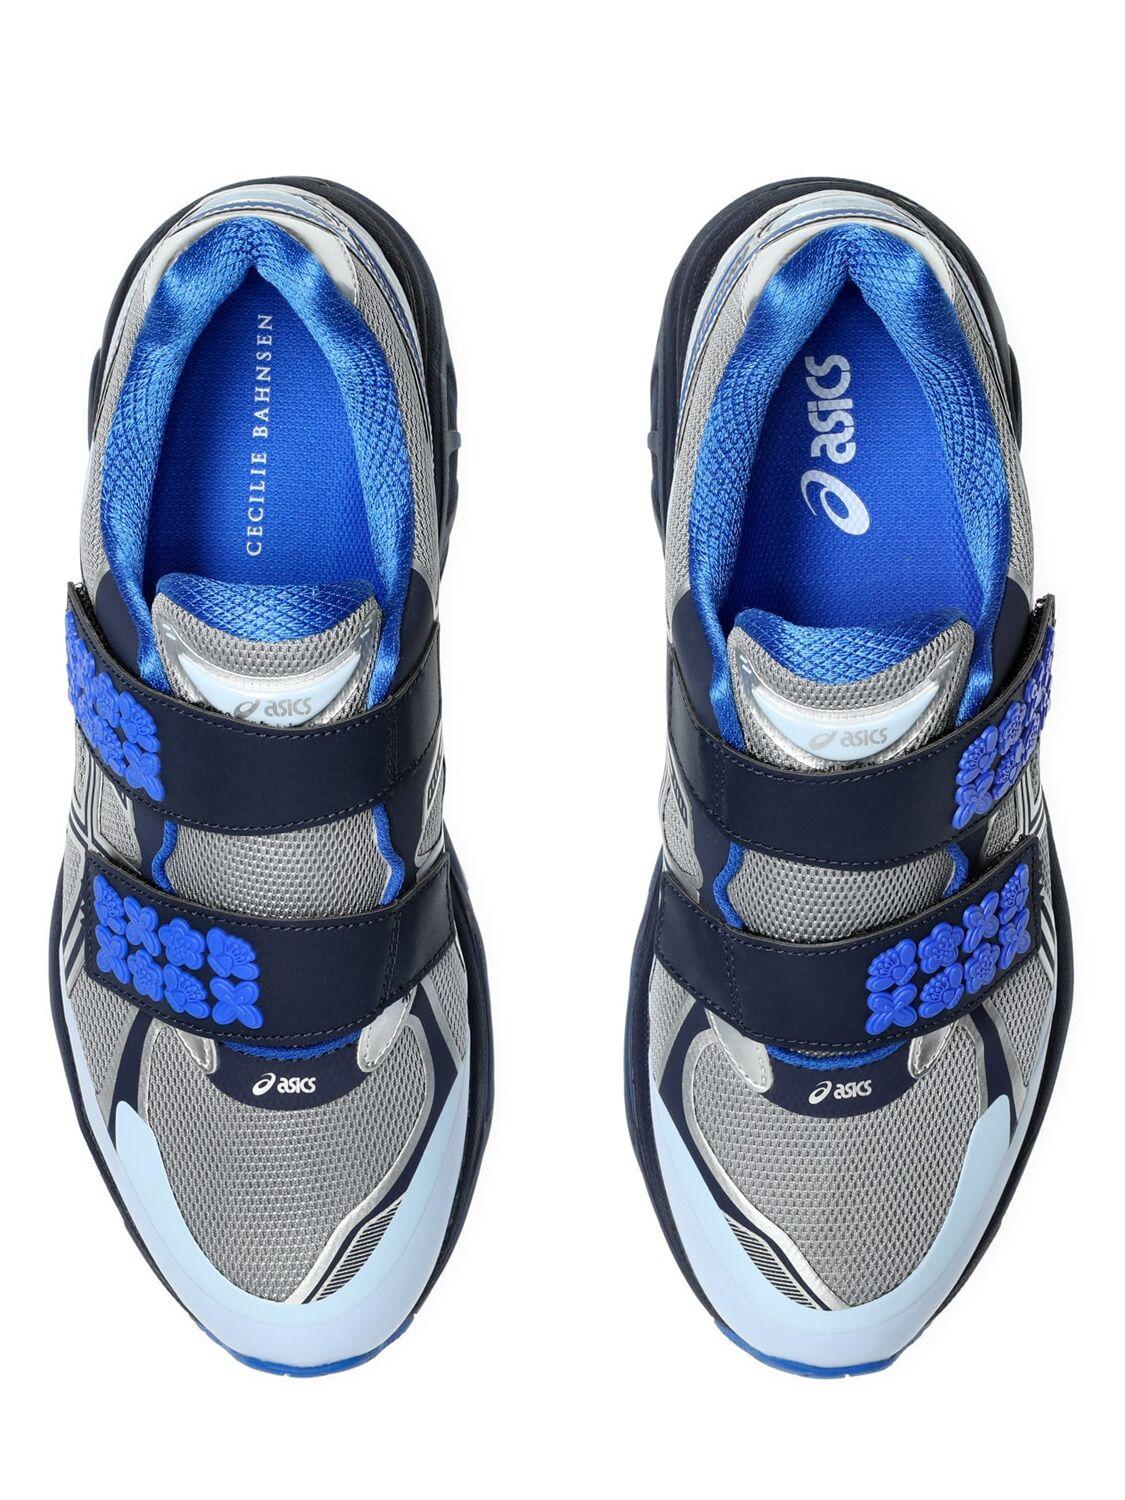 Asics Cecilie Bahnsen Gt-2160 Sneakers in Blue | Lyst UK